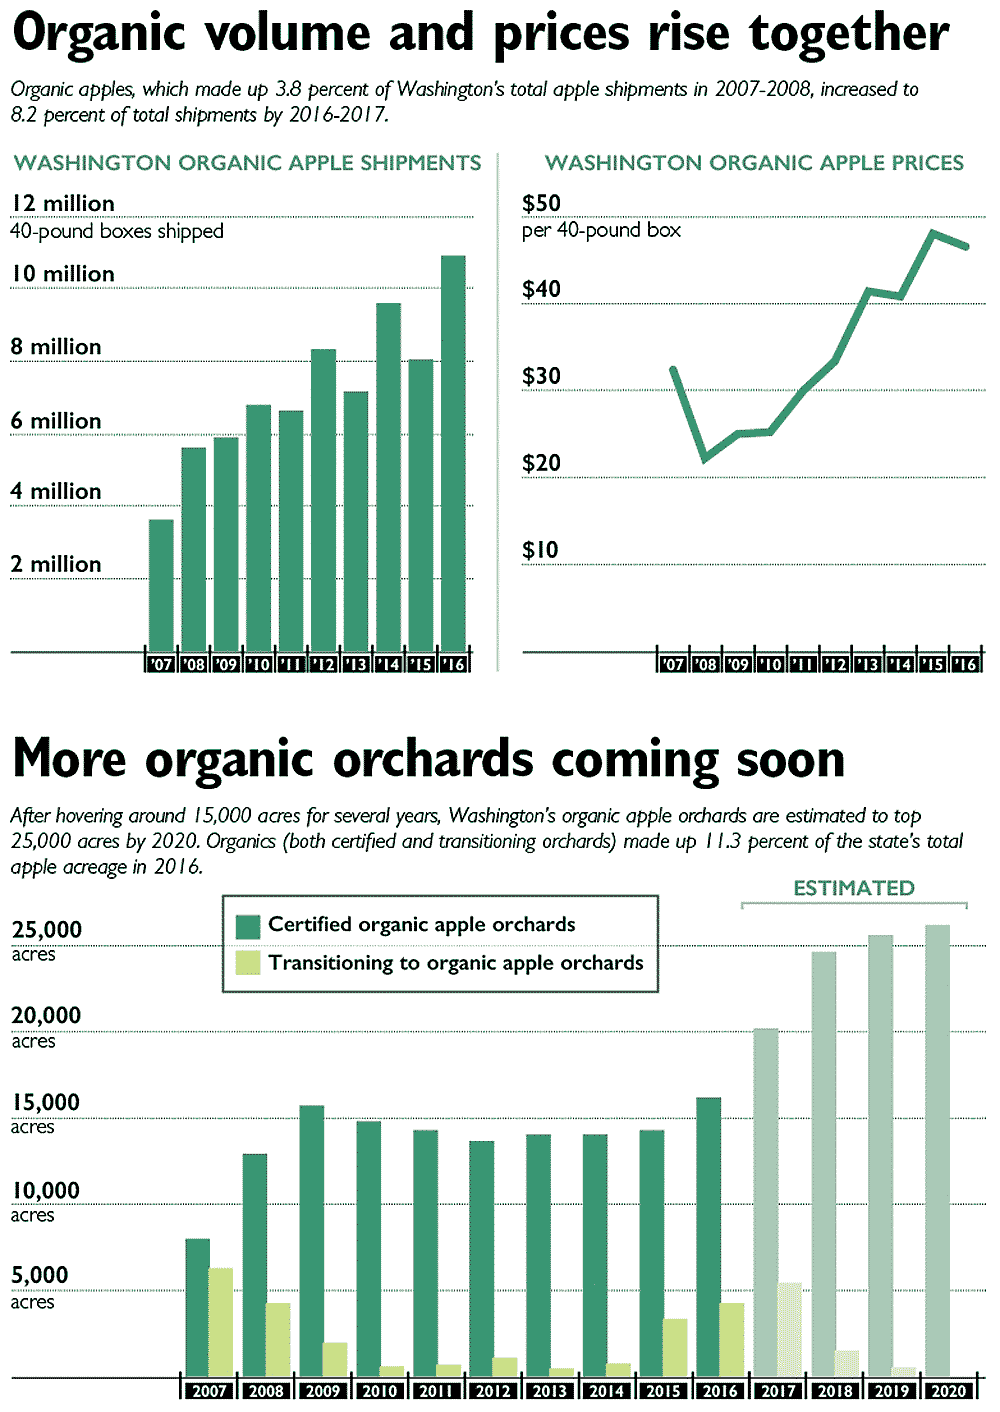 Organic volume and prices rise together: Organic apples, which made up 3.8 percent of Washington’s total apple shipments in 2007-2008, increased to 8.2 percent of total shipments by 2016-2017. More organic orchards coming soon: After hovering around 15,000 acres for several years, Washington’s organic apple orchards are estimated to top 25,000 acres by 2020. Organics (both certified and transitioning orchards) made up 11.3 percent of the state’s total apple acreage in 2016. <b>(Source: WSU-Center for sustaining agriculture and natural resources. Jared Johnson/Good Fruit Grower)</b>